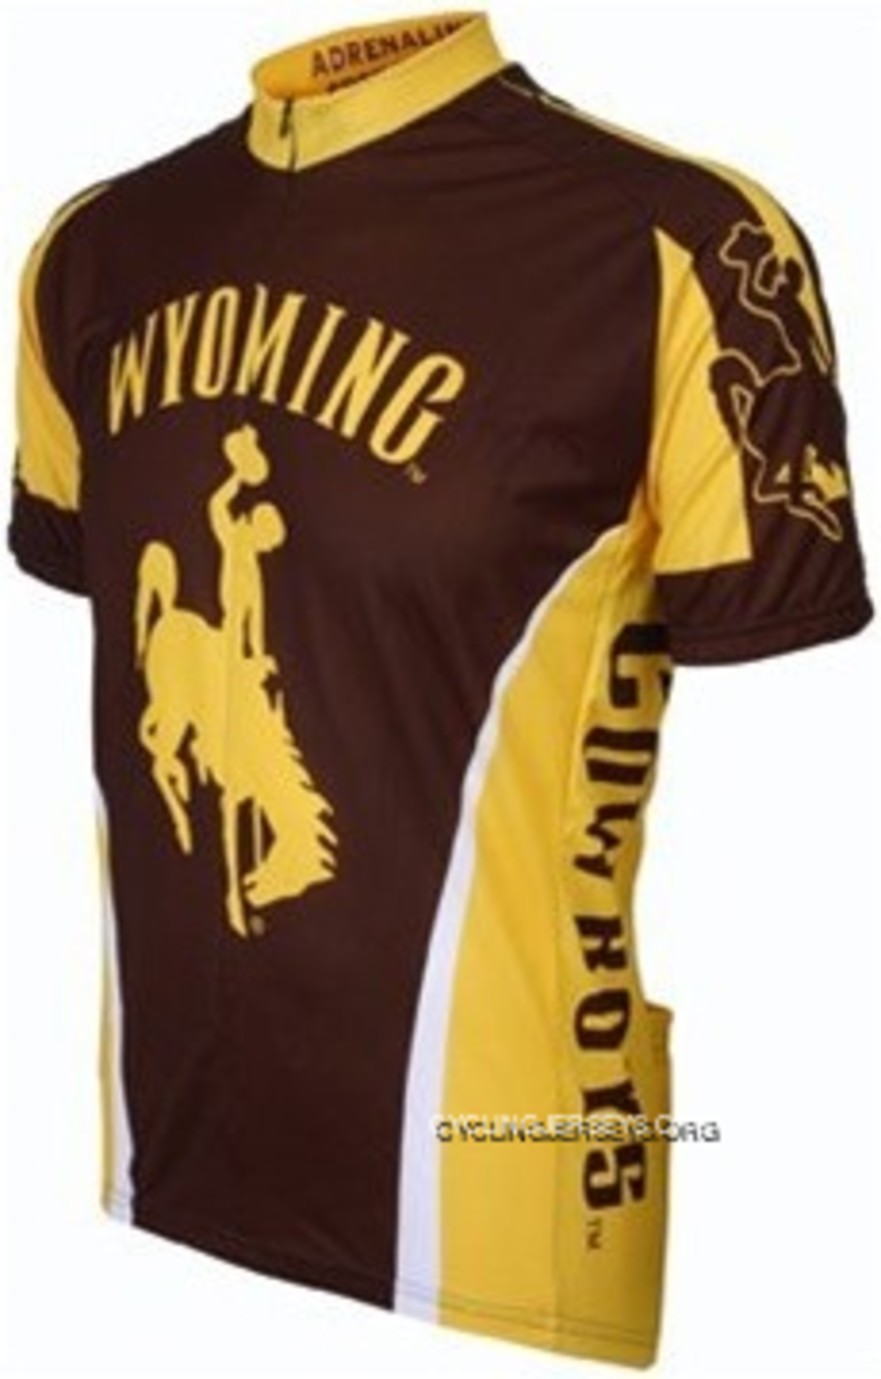 University Of Wyoming Cowboys Short Sleeve Road Cycling Jersey Best